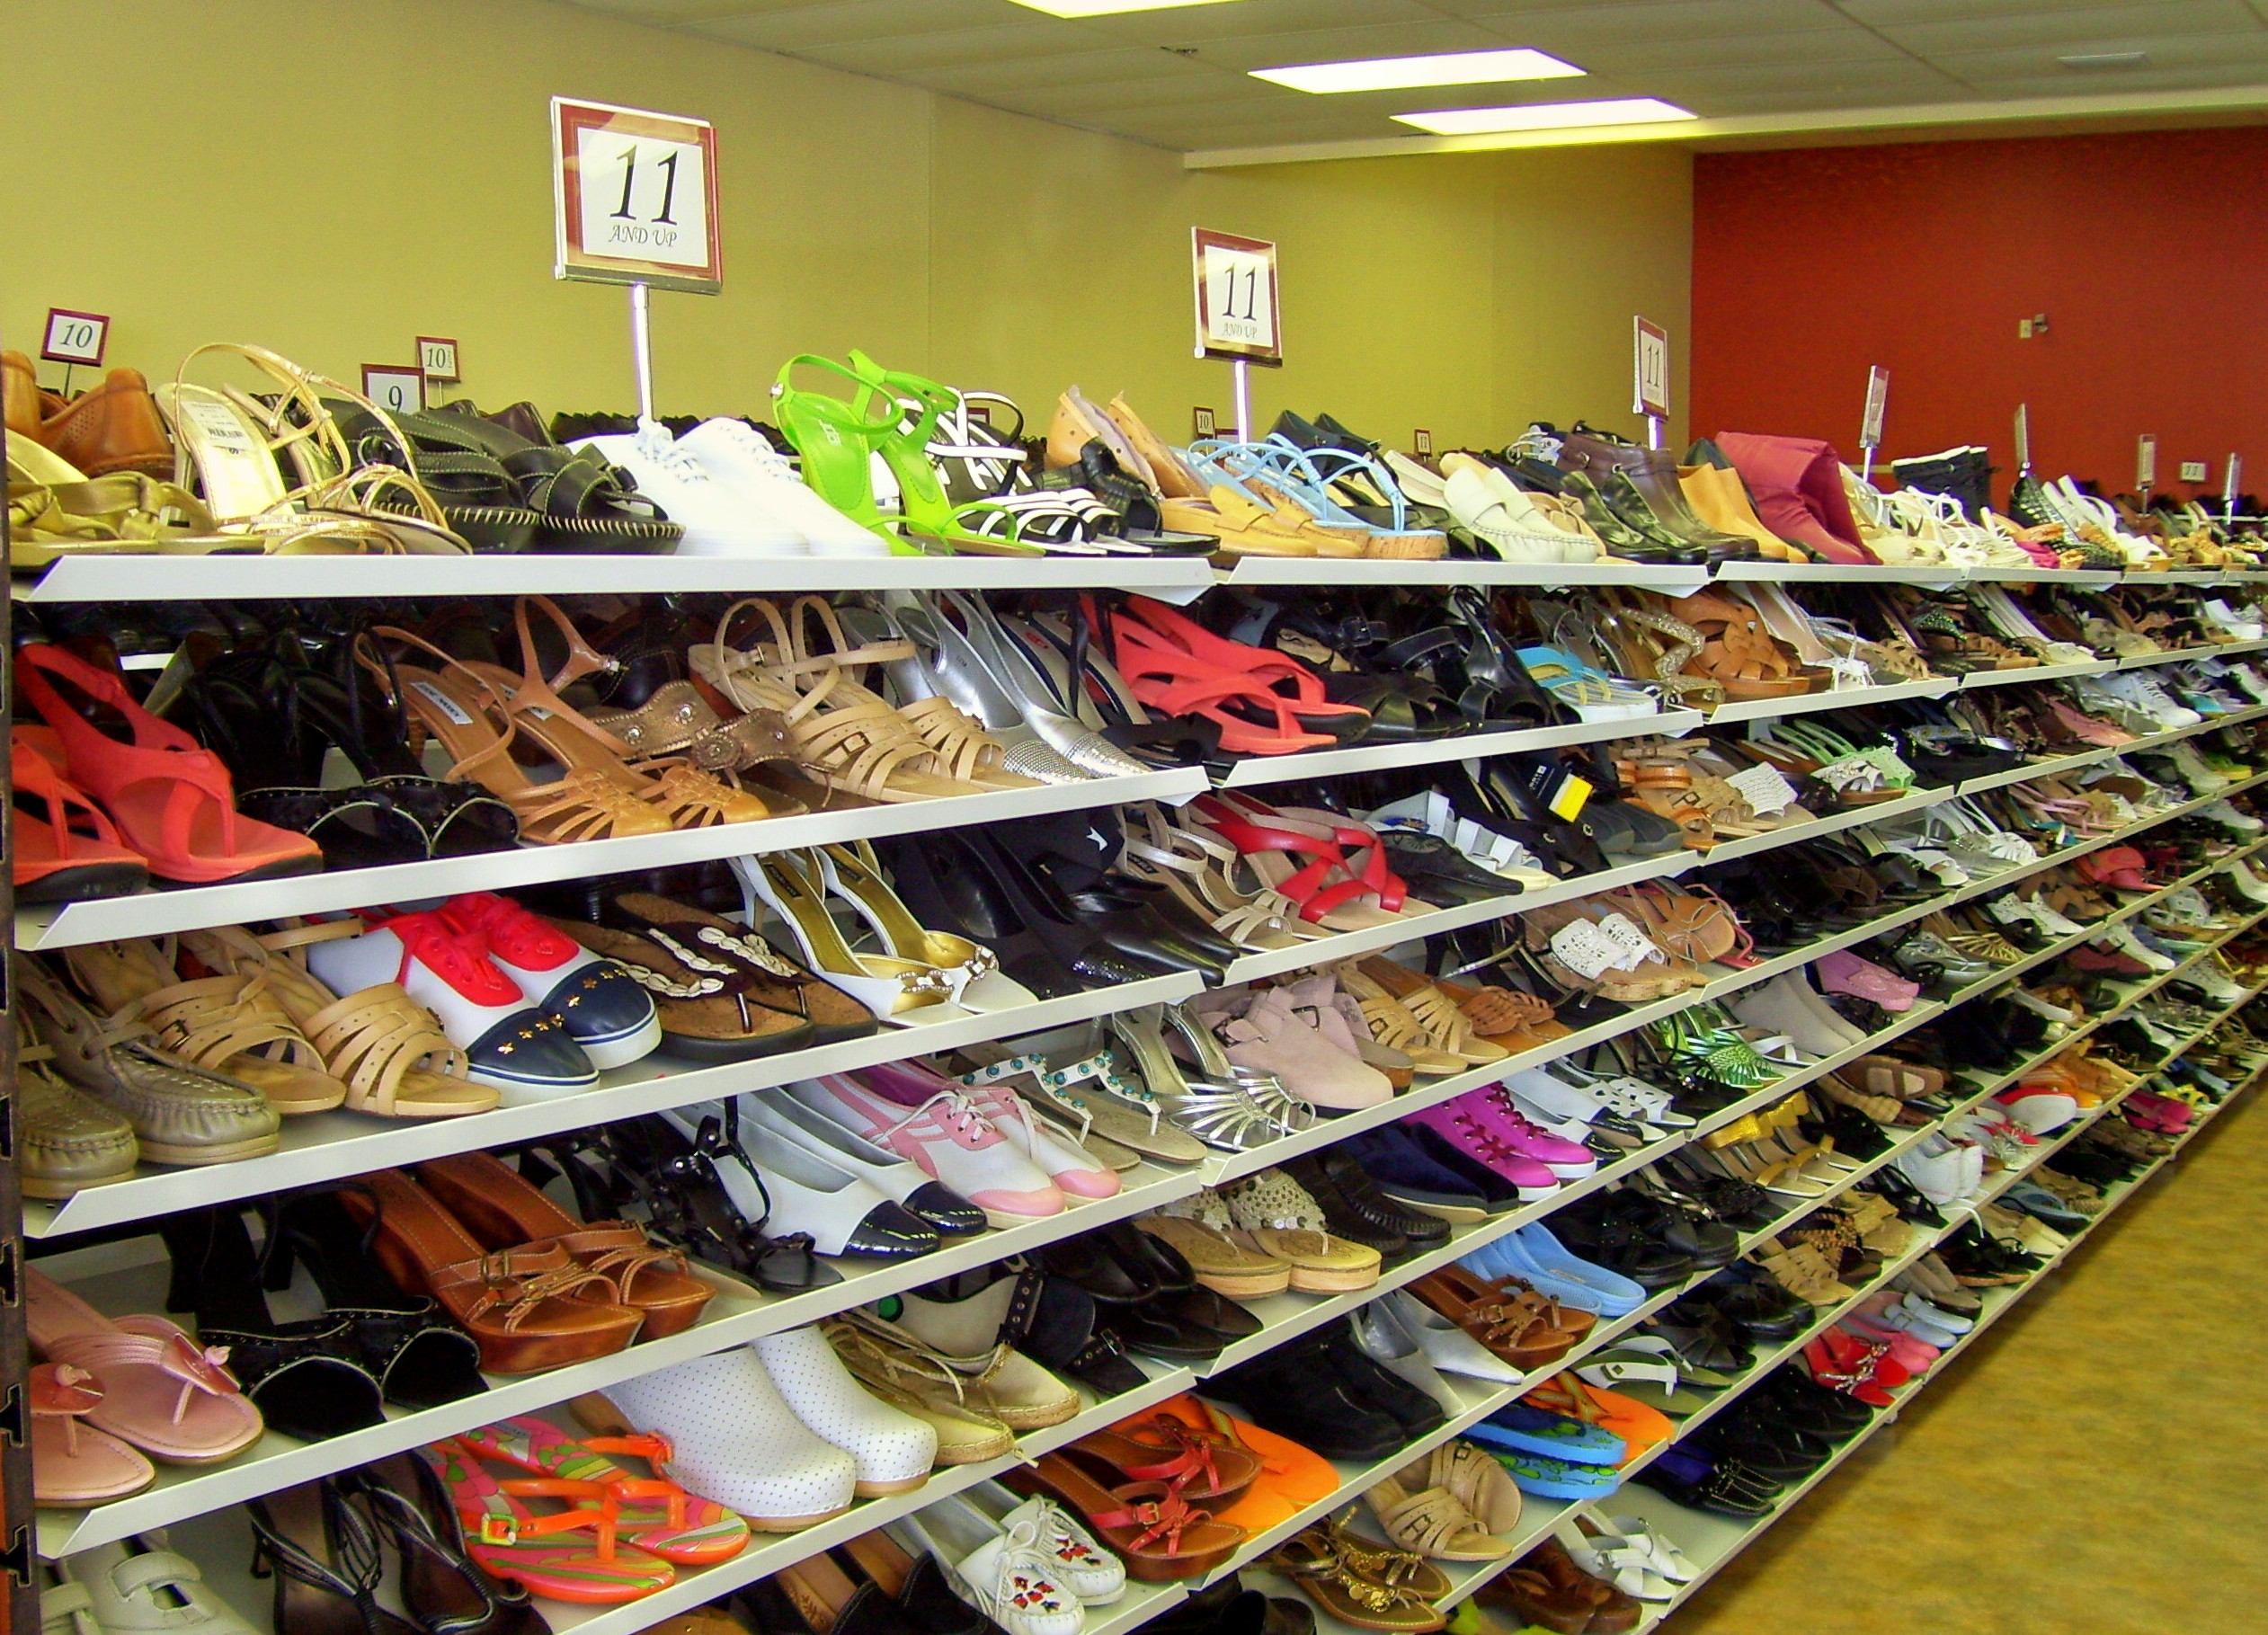 The Best 10 Shoe Stores near CoolSprings Galleria in Franklin, TN - Yelp